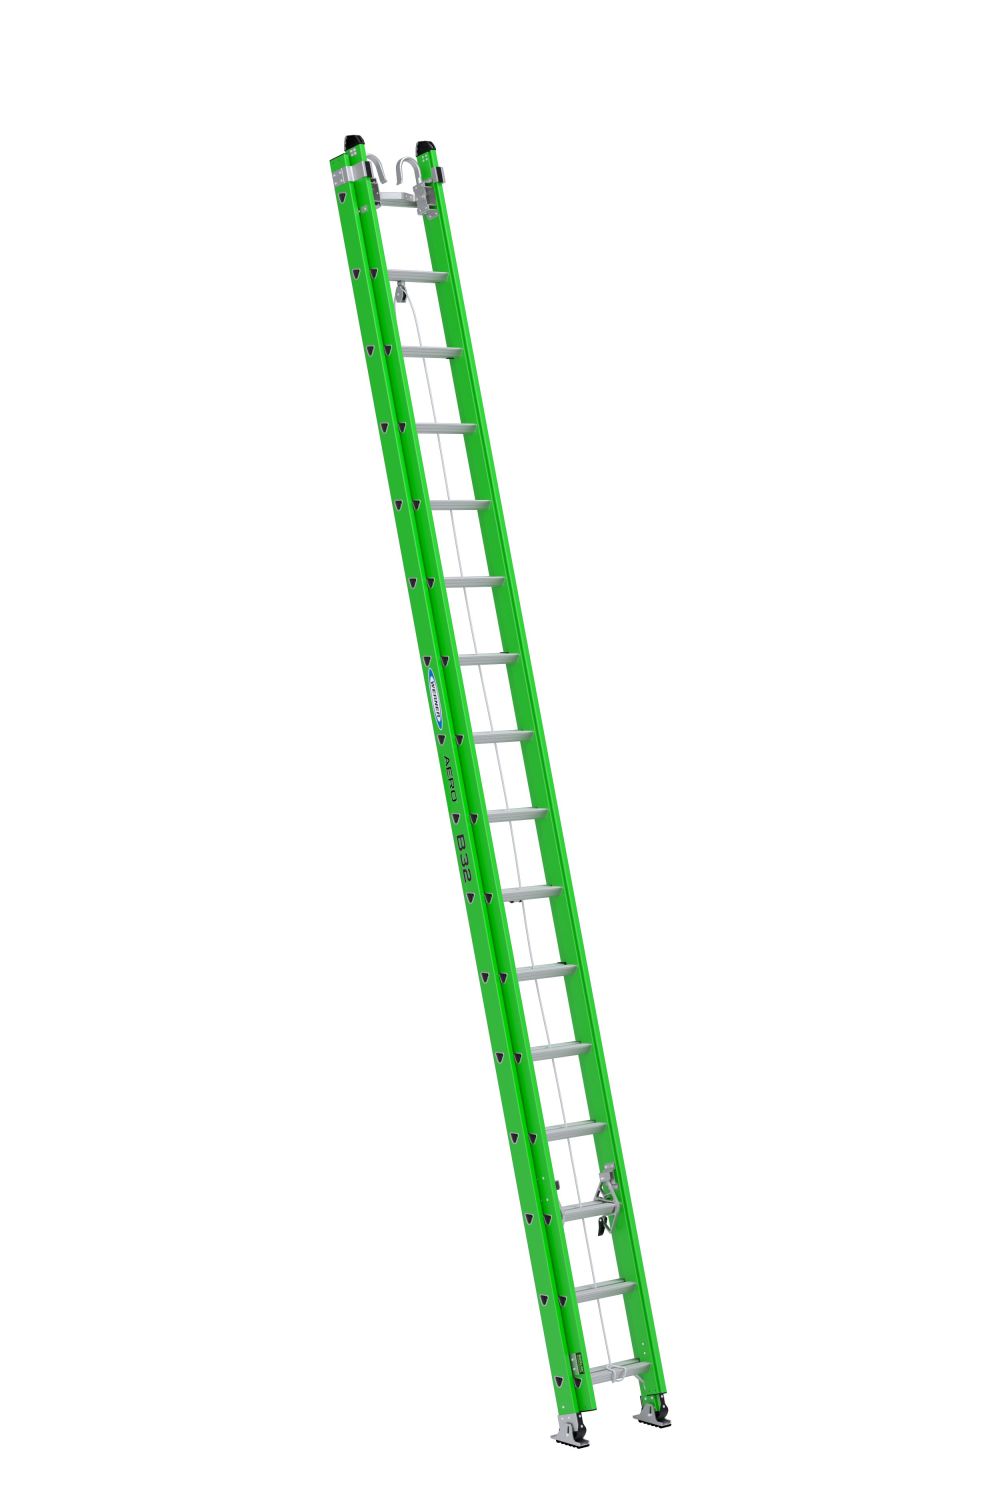 Ladder Replacement Rope for 32ft ladder or smaller. 